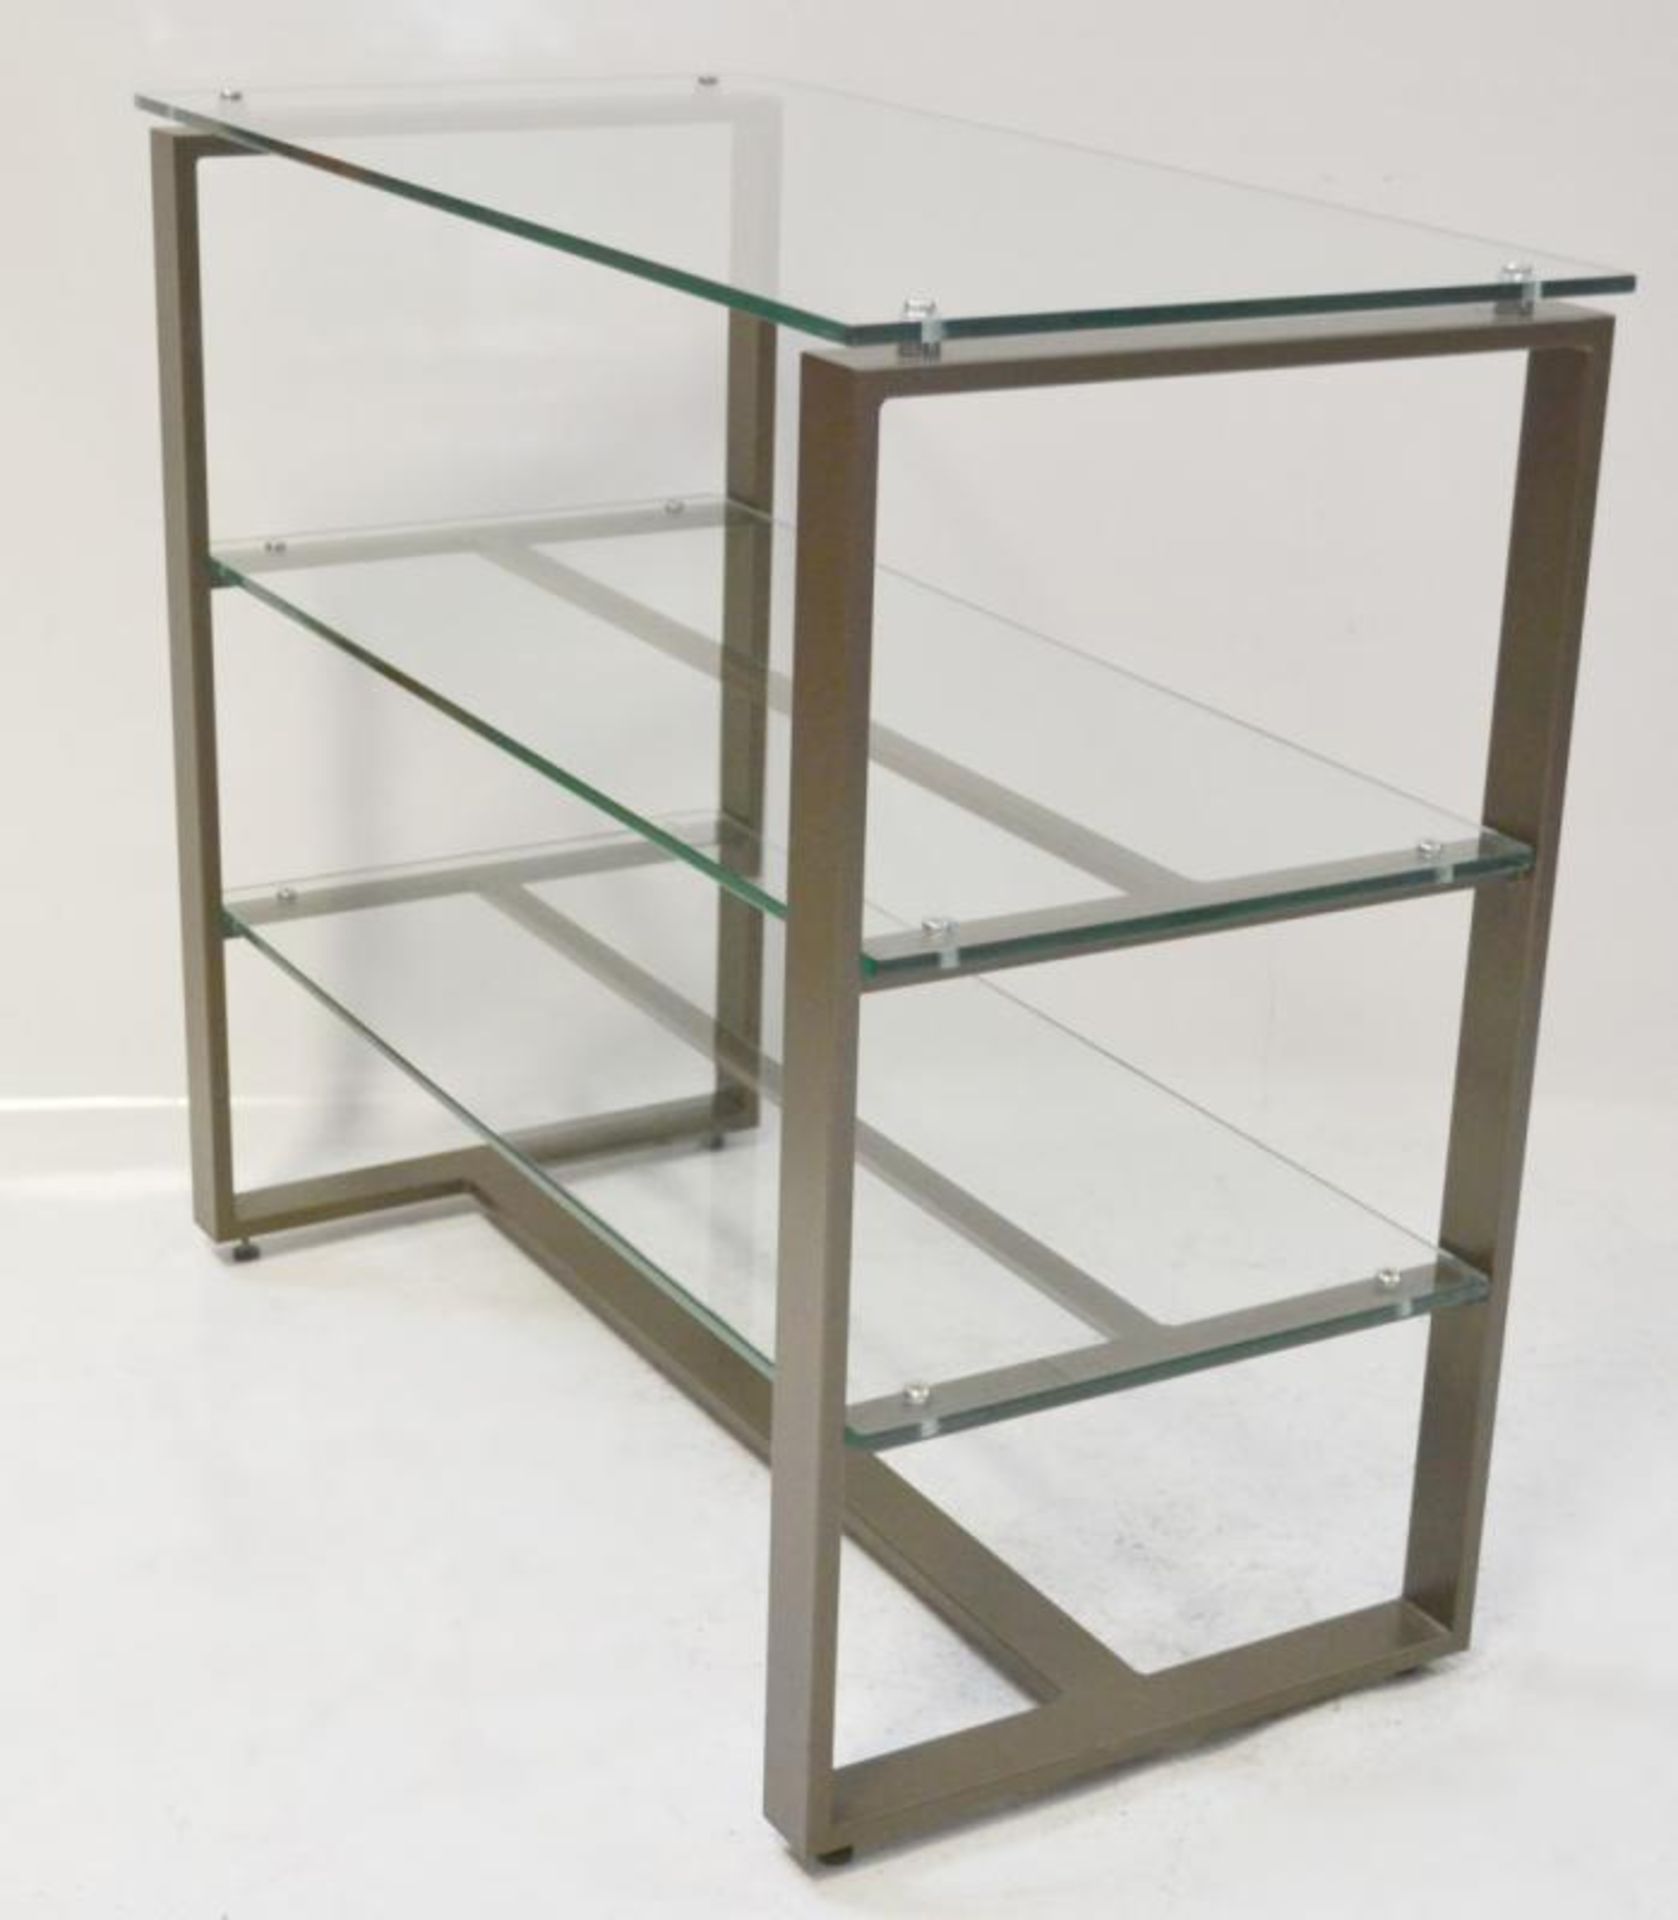 8 x Medium Contemporary Retail Glass Display Units With Sturdy Metal Frames and Three Shelves - - Image 4 of 9